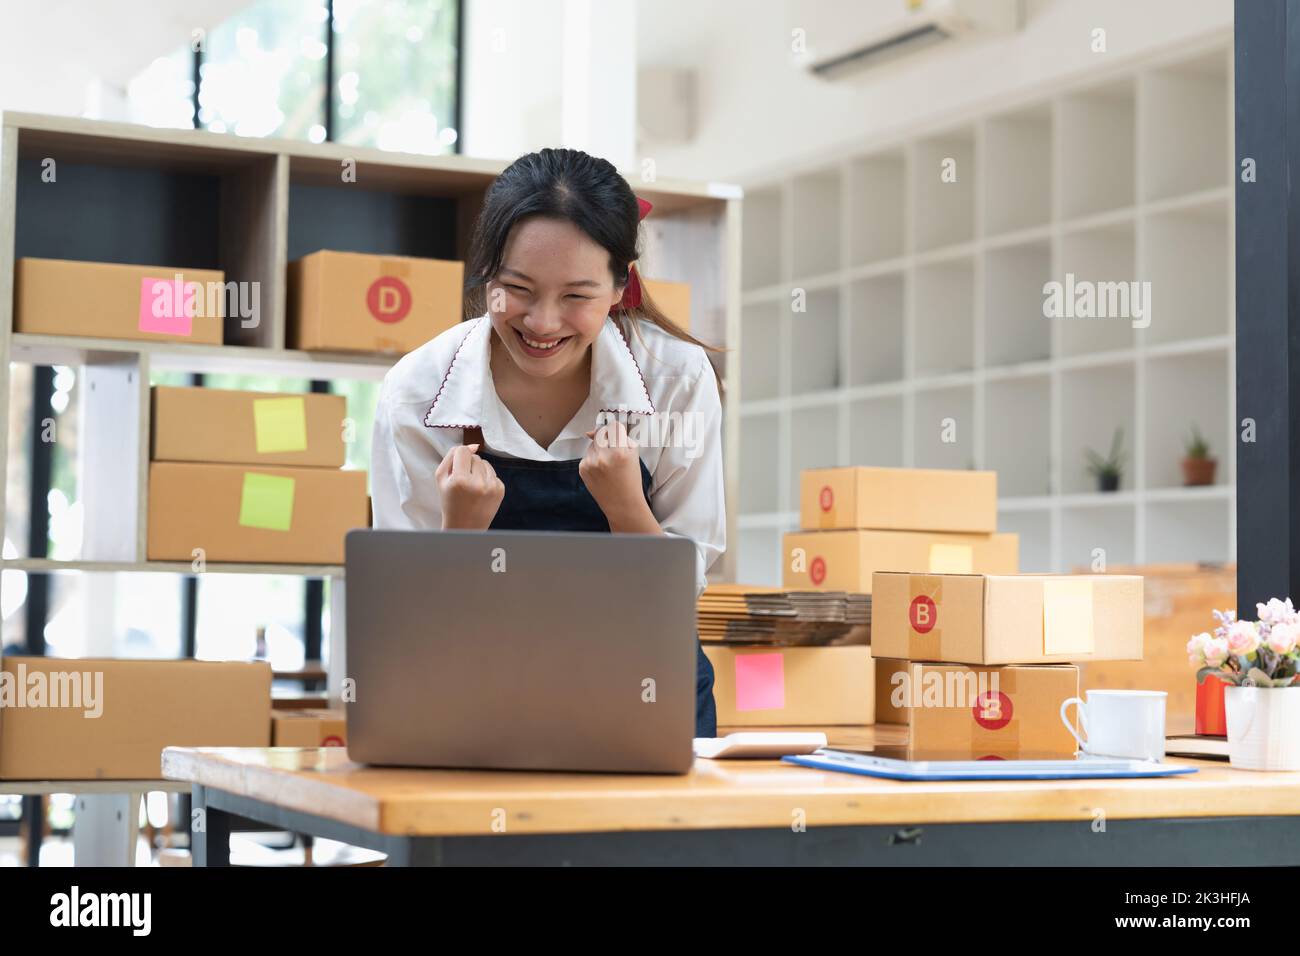 Happy successful SME entrepreneur with arms up, Home office, Business online and delivery, Selling online, Startup small business concept. Stock Photo